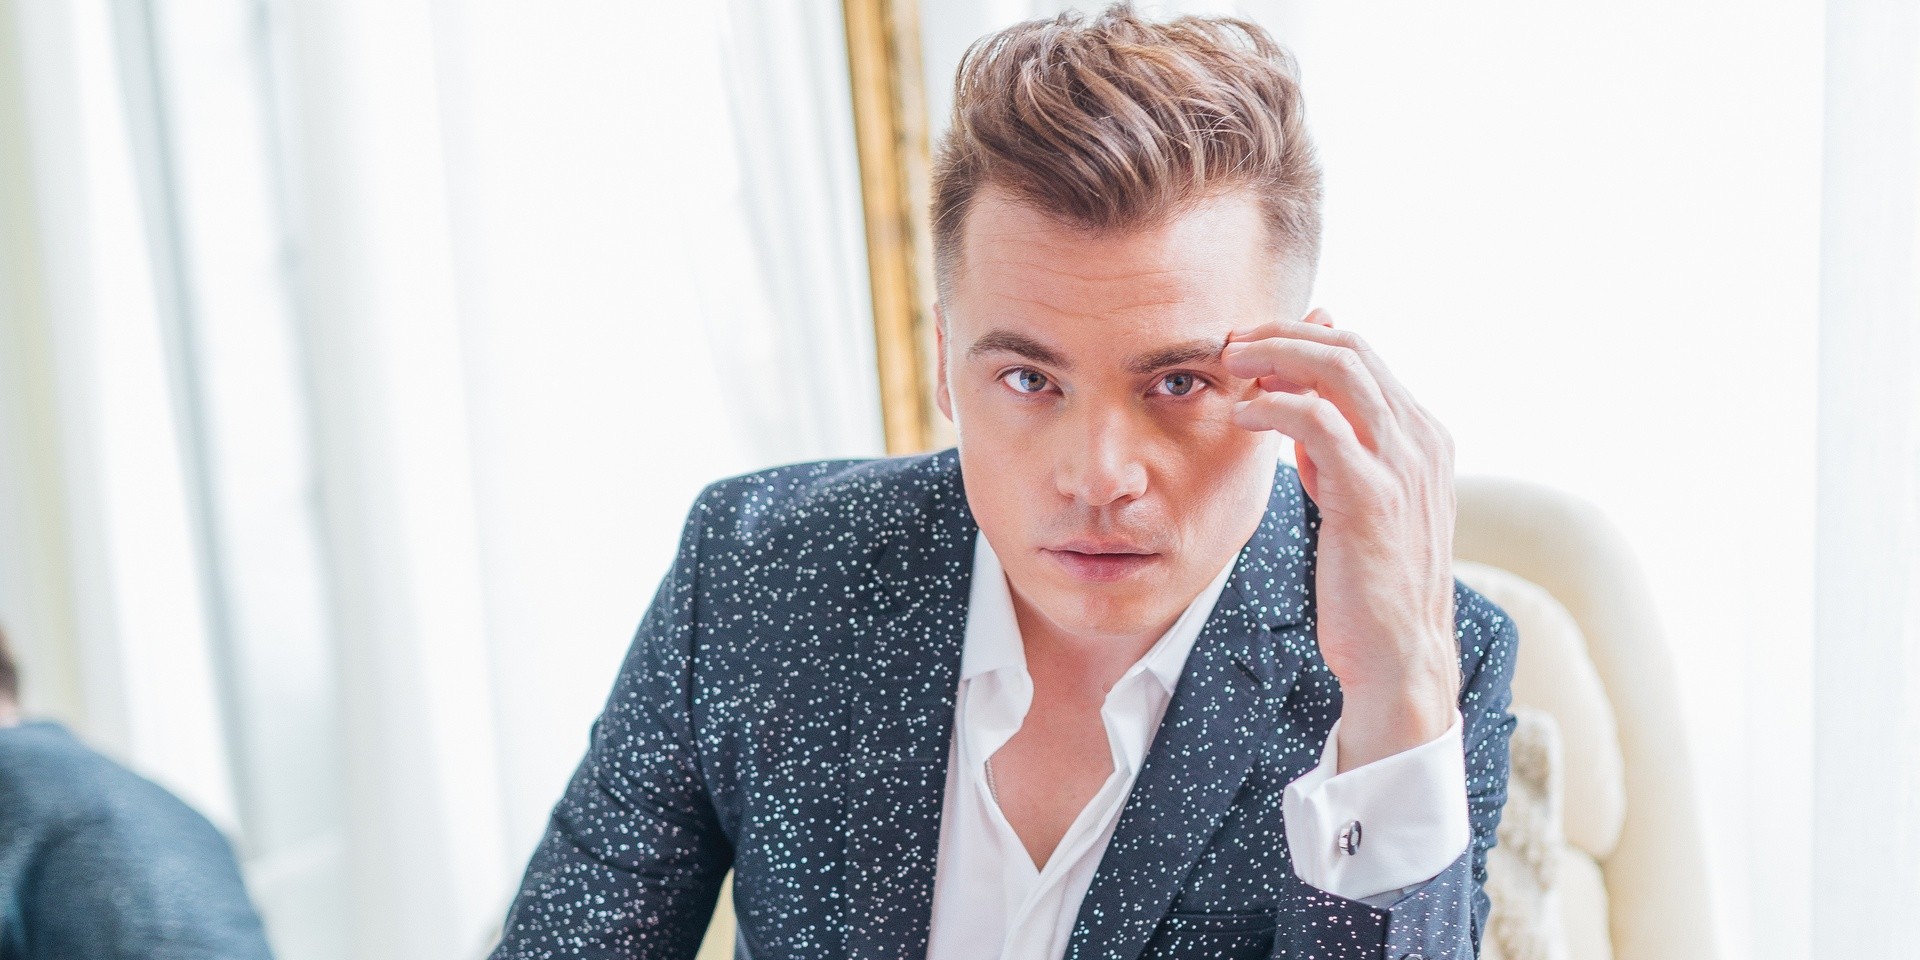 Shawn Hook talks about his journey from trombone player to pop stardom, wanting to work with Post Malone, Billie Eilish, and more 